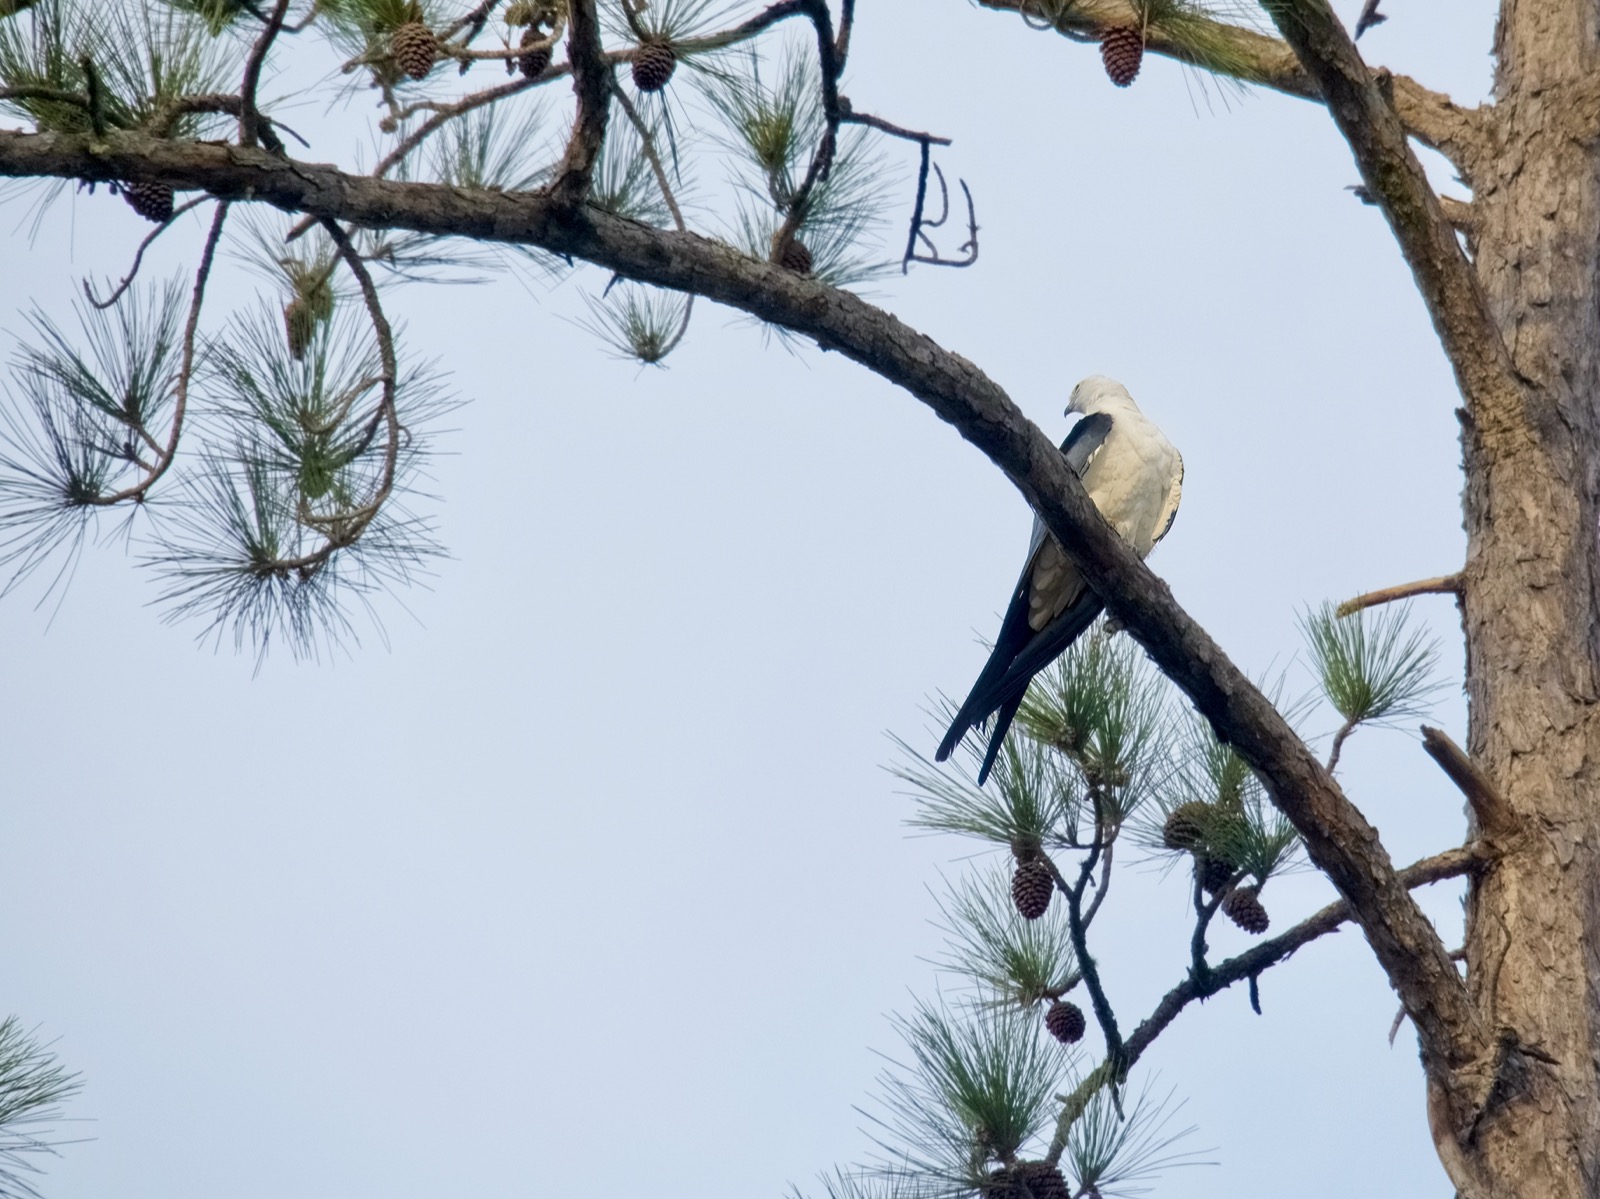 Not bird lens, per se, but what I had. I don't see these often. A swallow-tail kite perched in a pine tree.